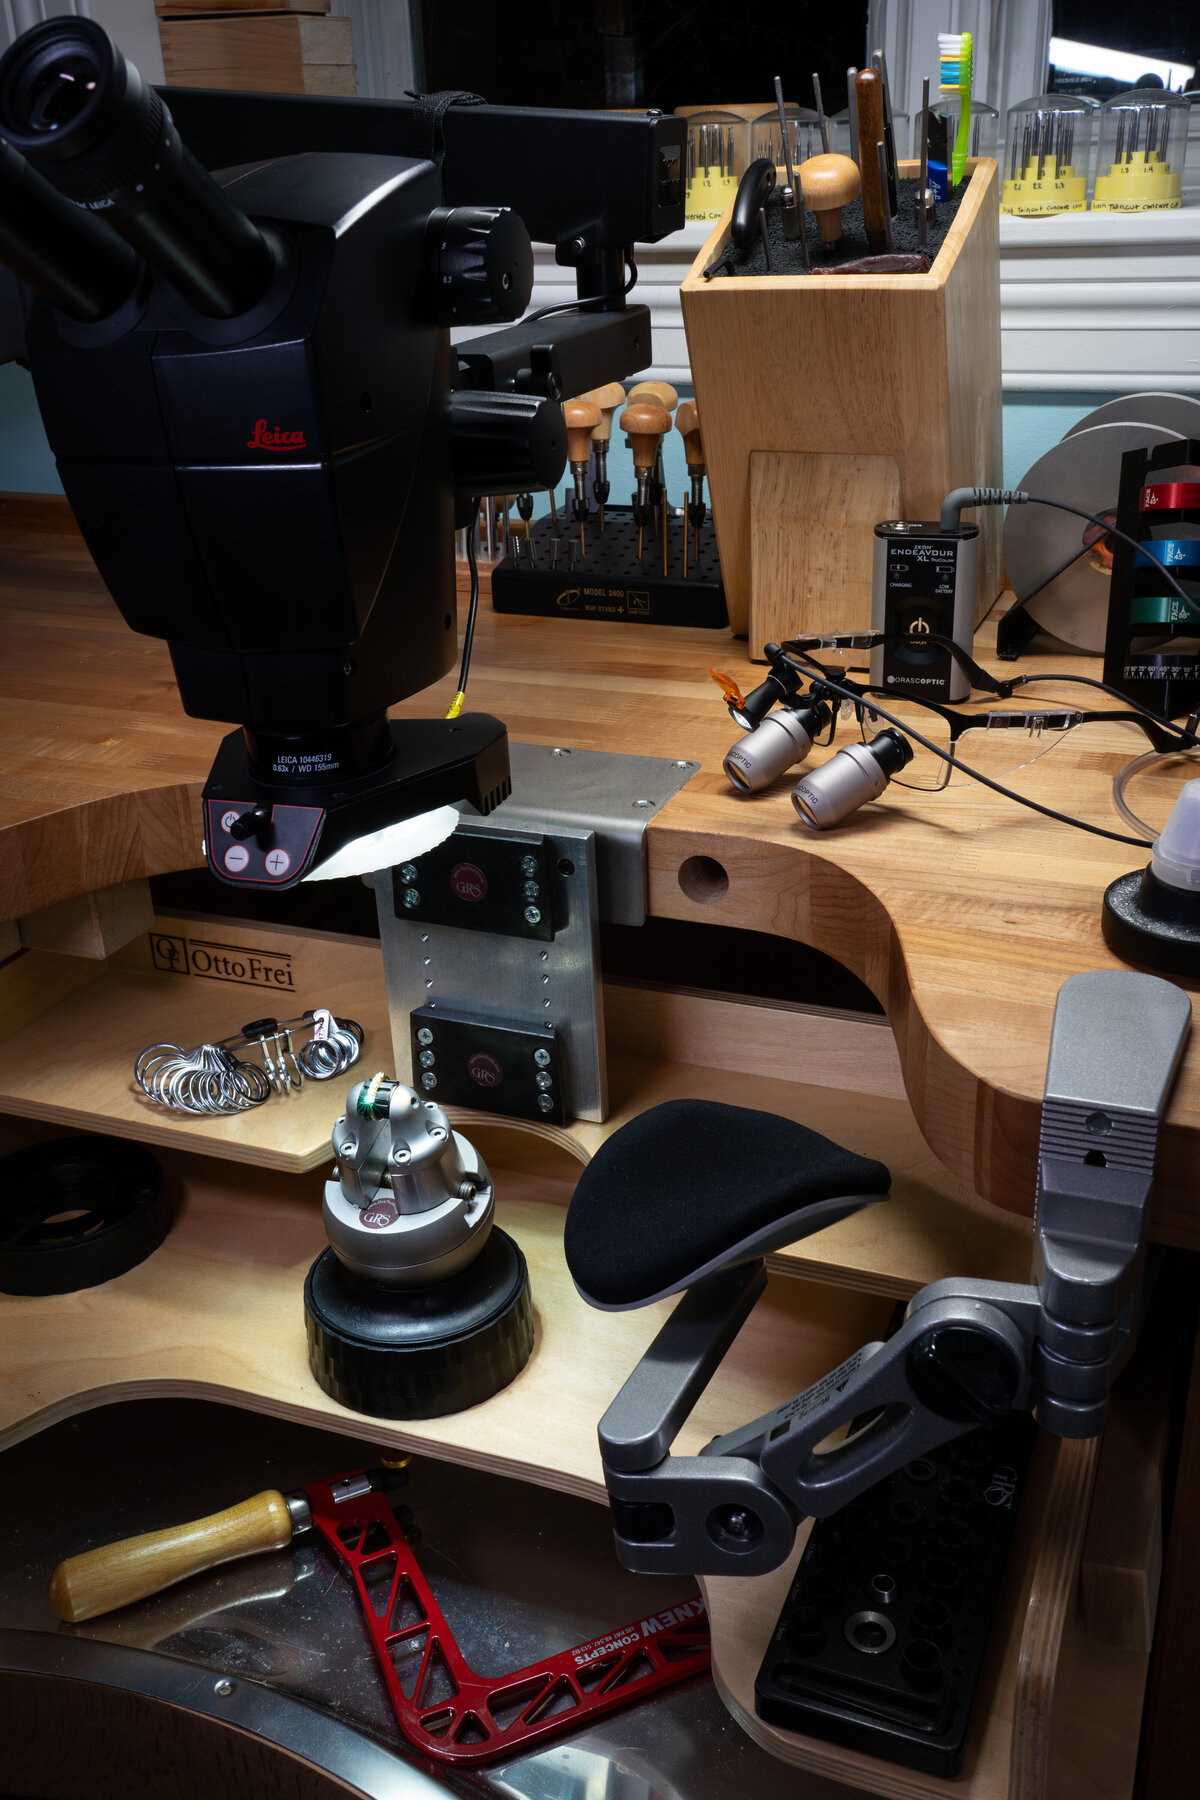 Craftsman jewelry bench with Leica microscope